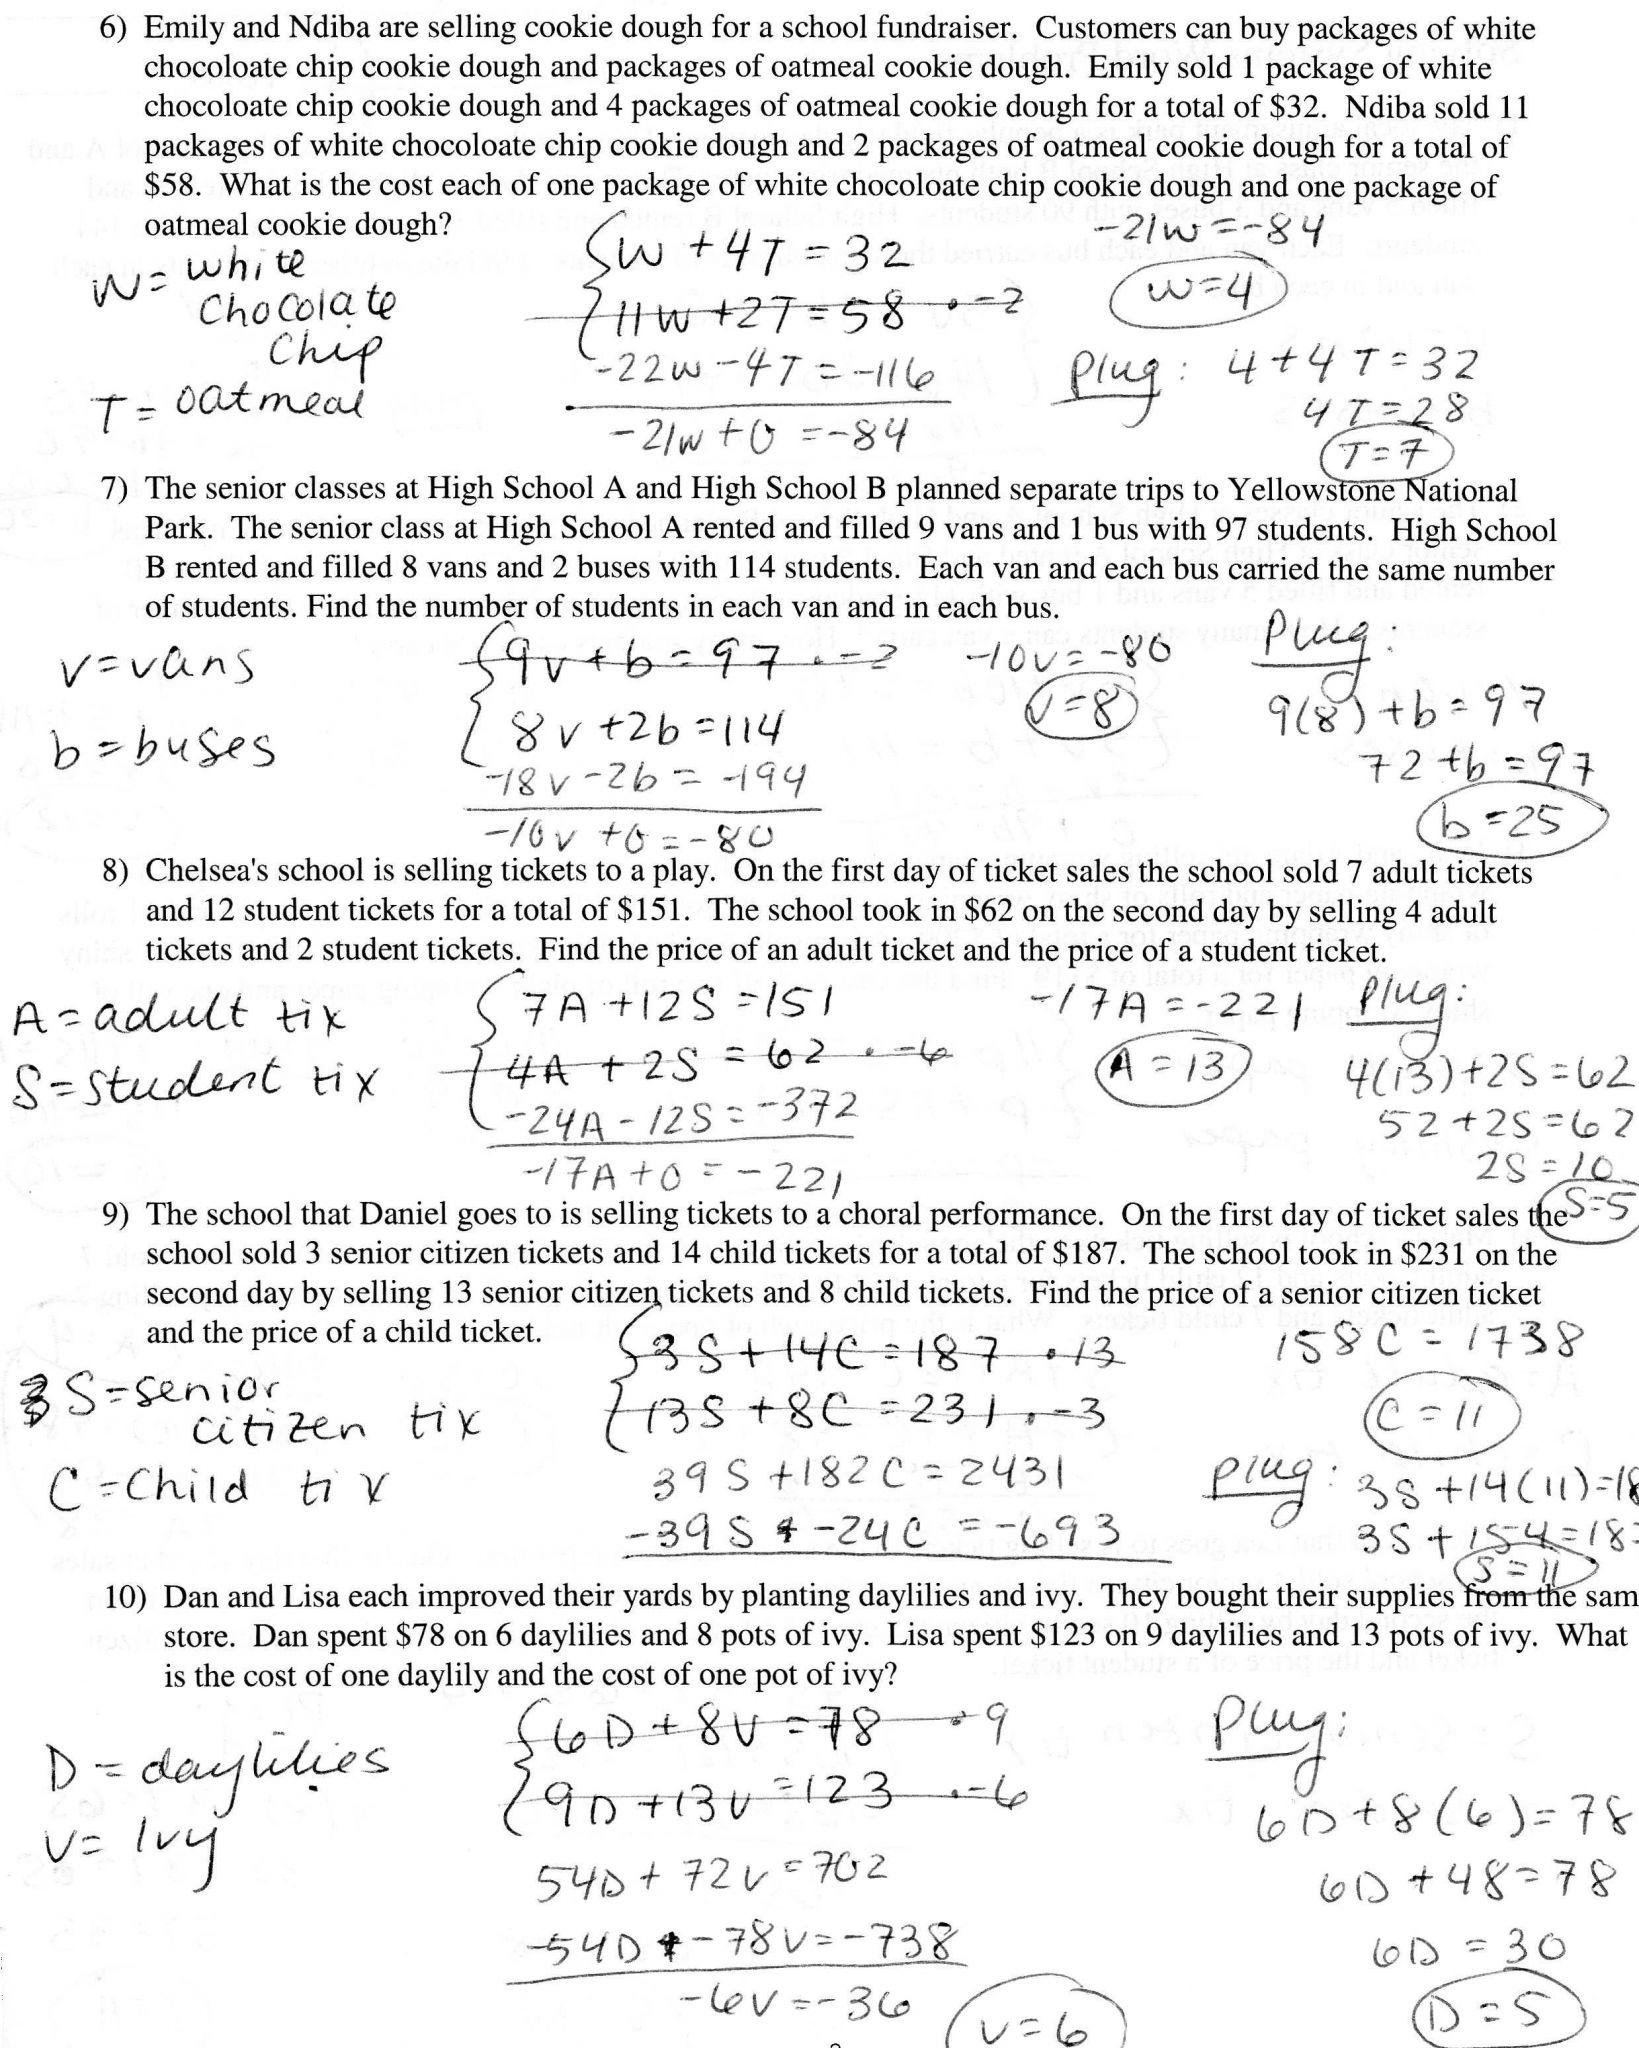 Gas Laws Practice Problems Worksheet Answers Along with How to Find Answers to Homework Worksheets New Gas Laws Chemistry